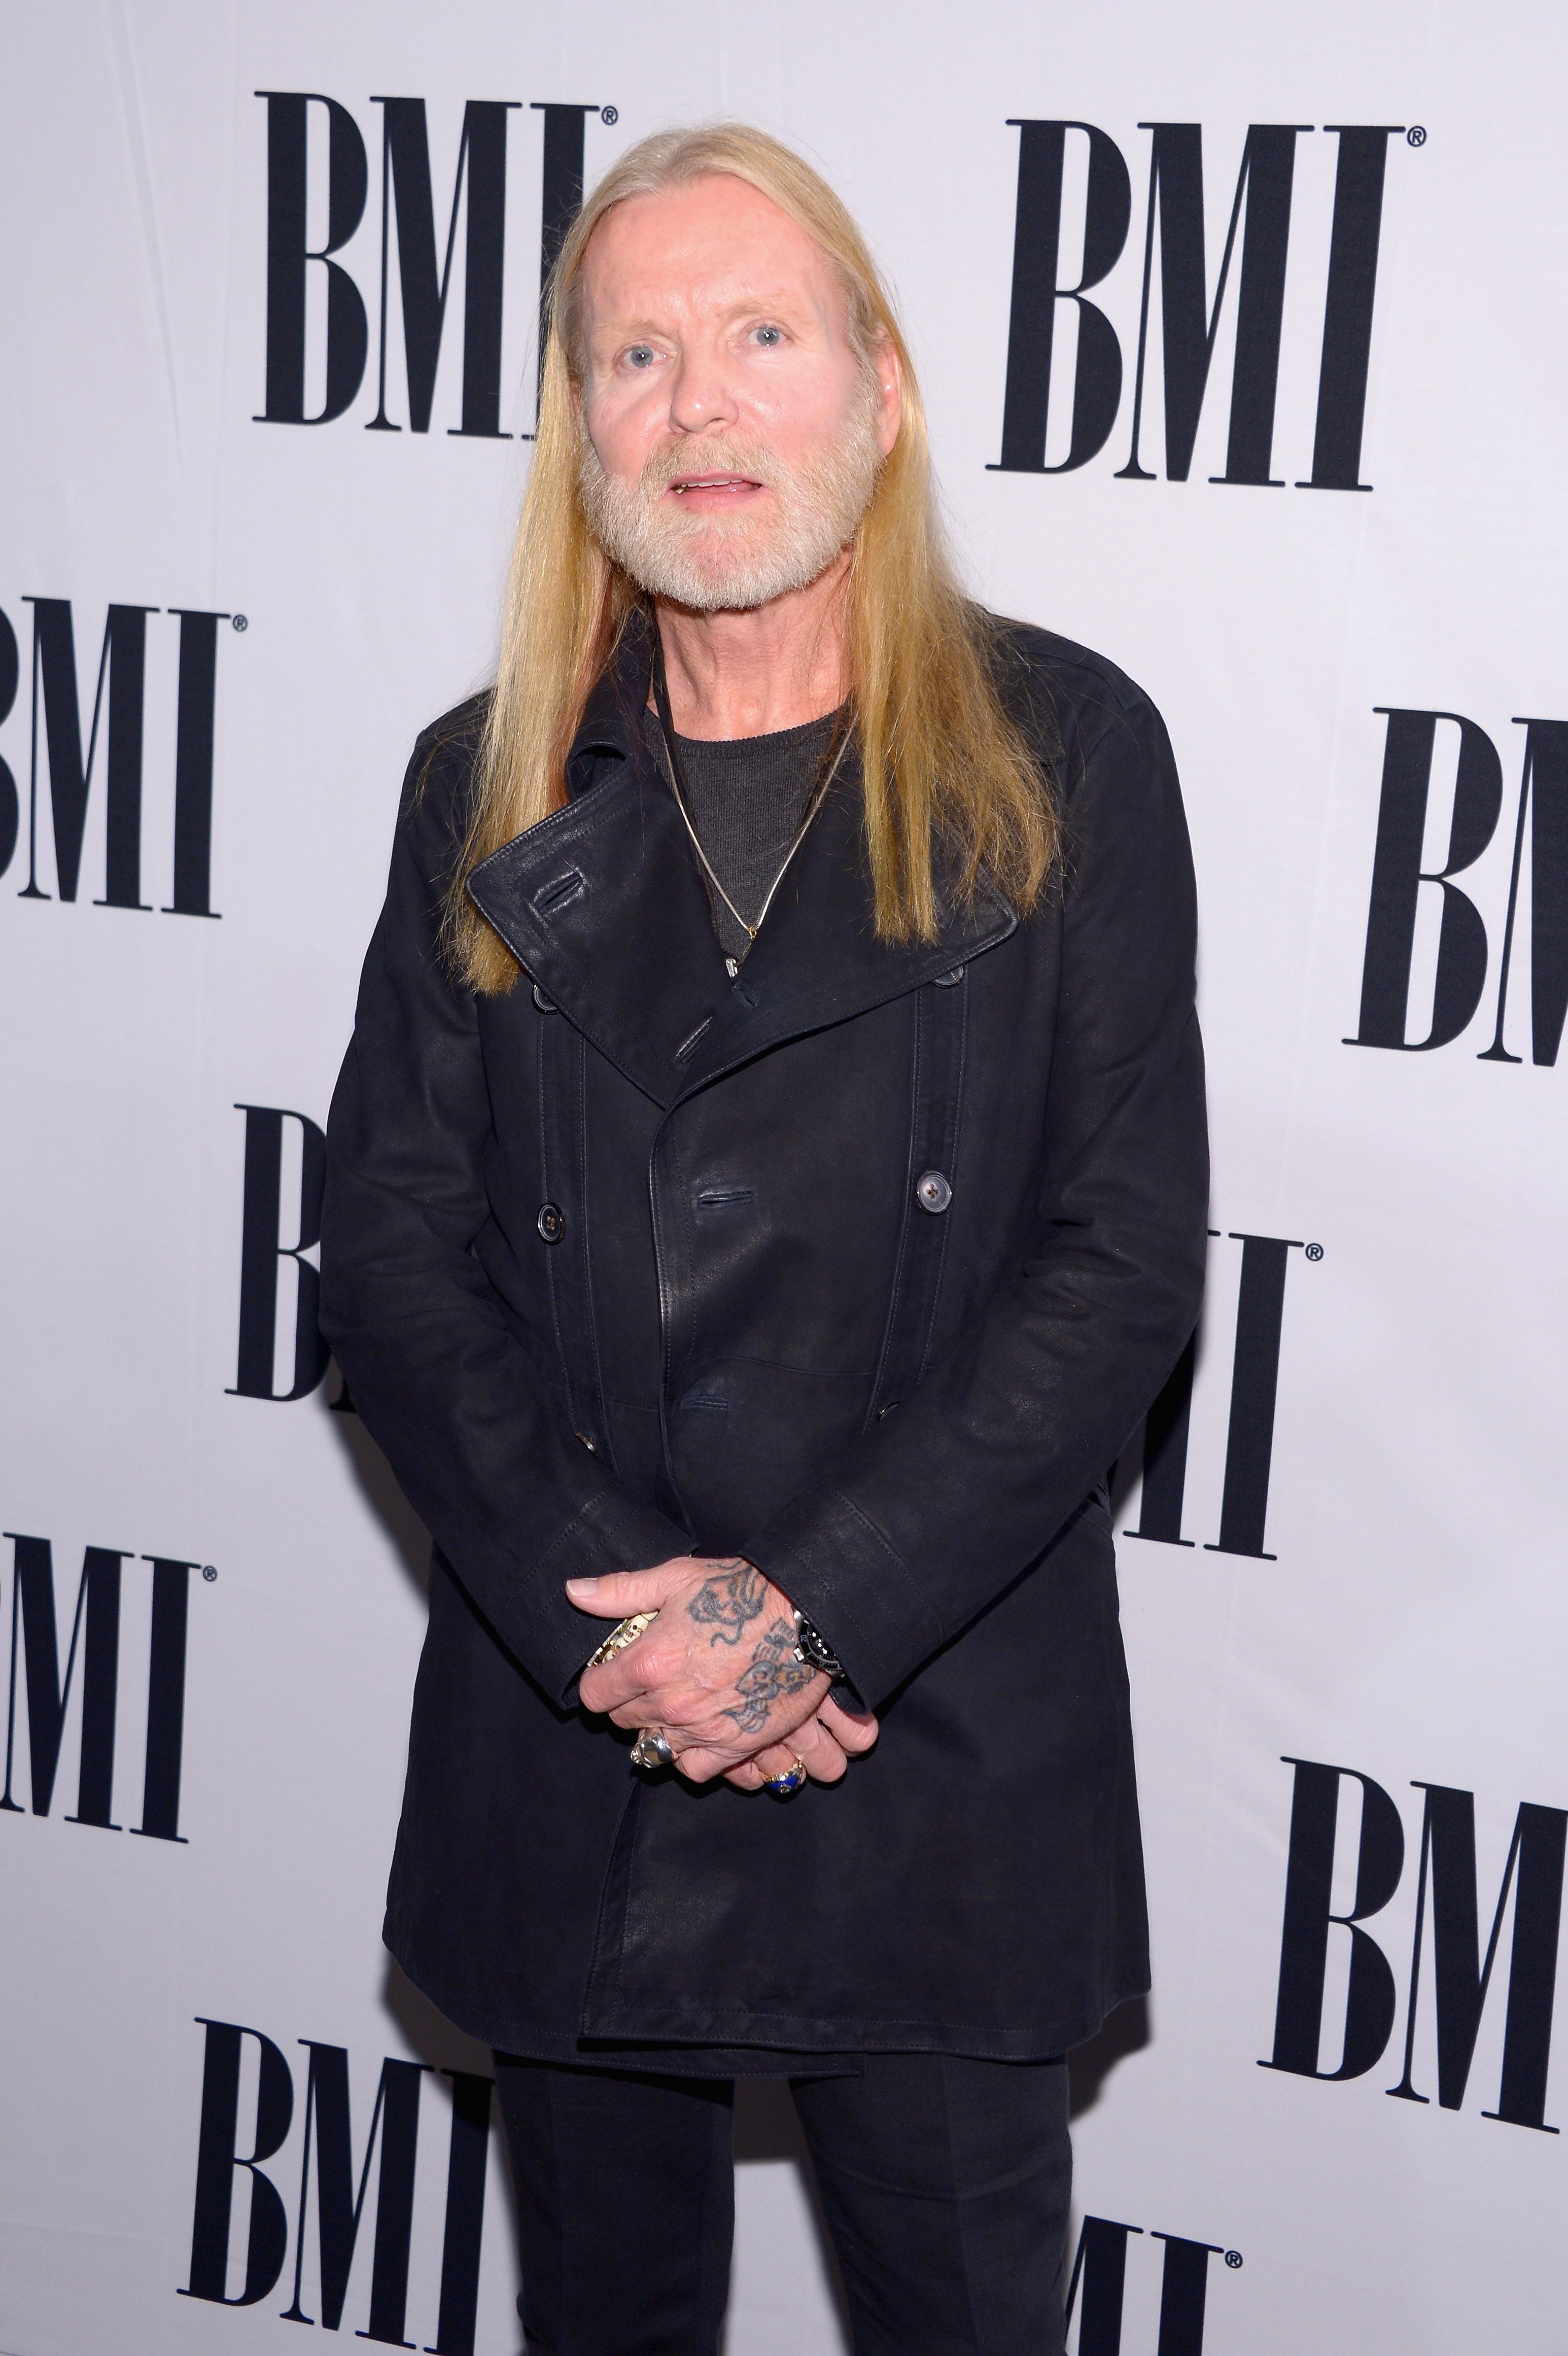 Gregg Allman attends the 61st annual BMI Country awards on November 5, 2013 in Nashville, Tennessee. | Source: Getty Images